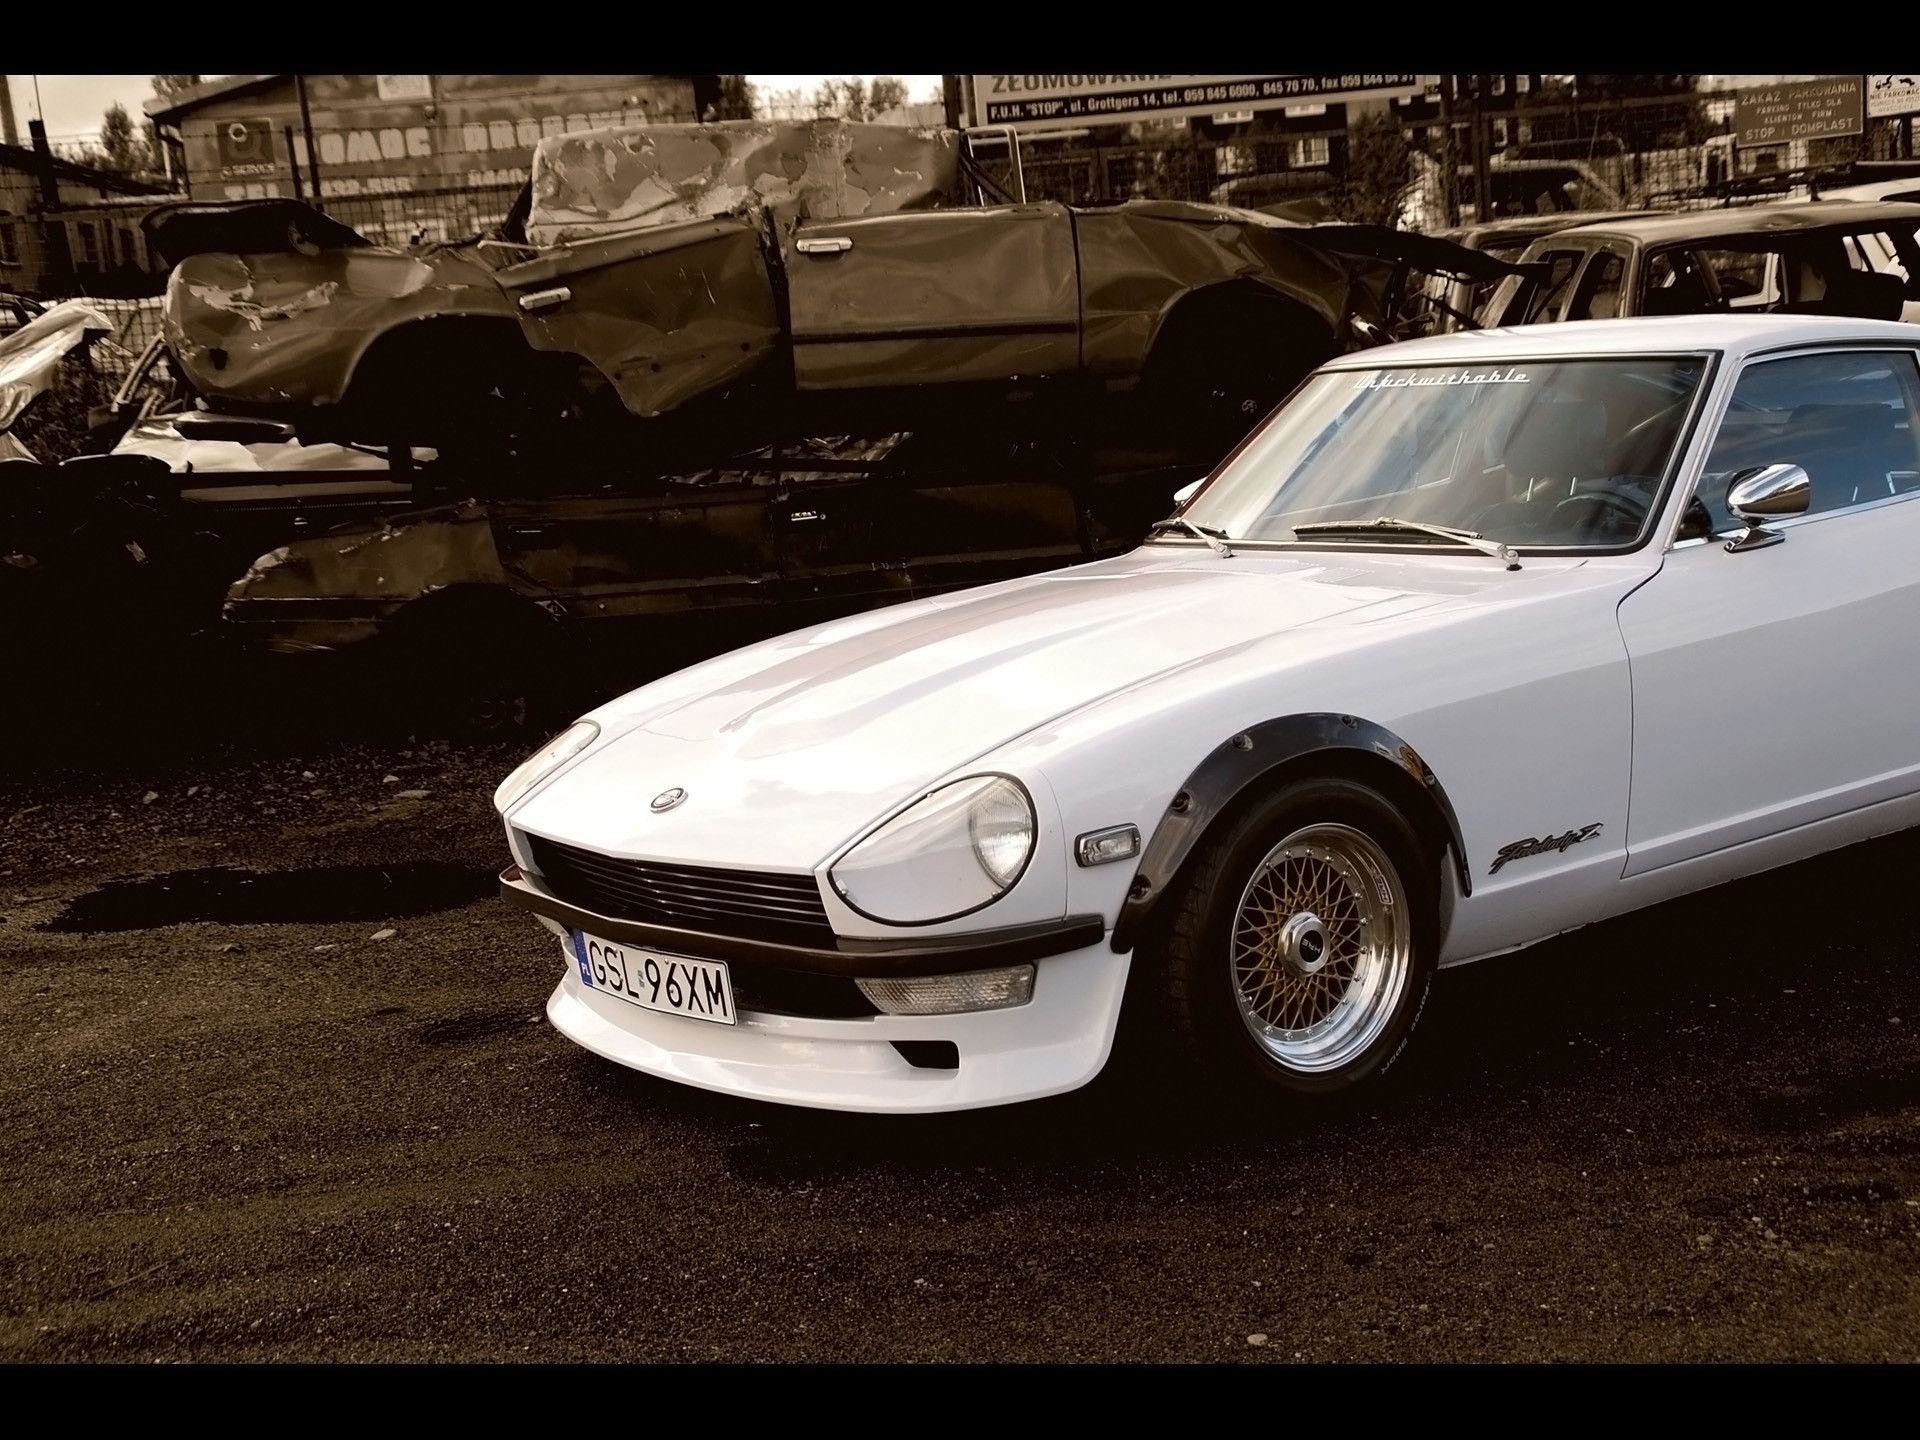 1920x1440 1973 Datsun 240Z S30 - Front And Side Section -  - Wallpaper